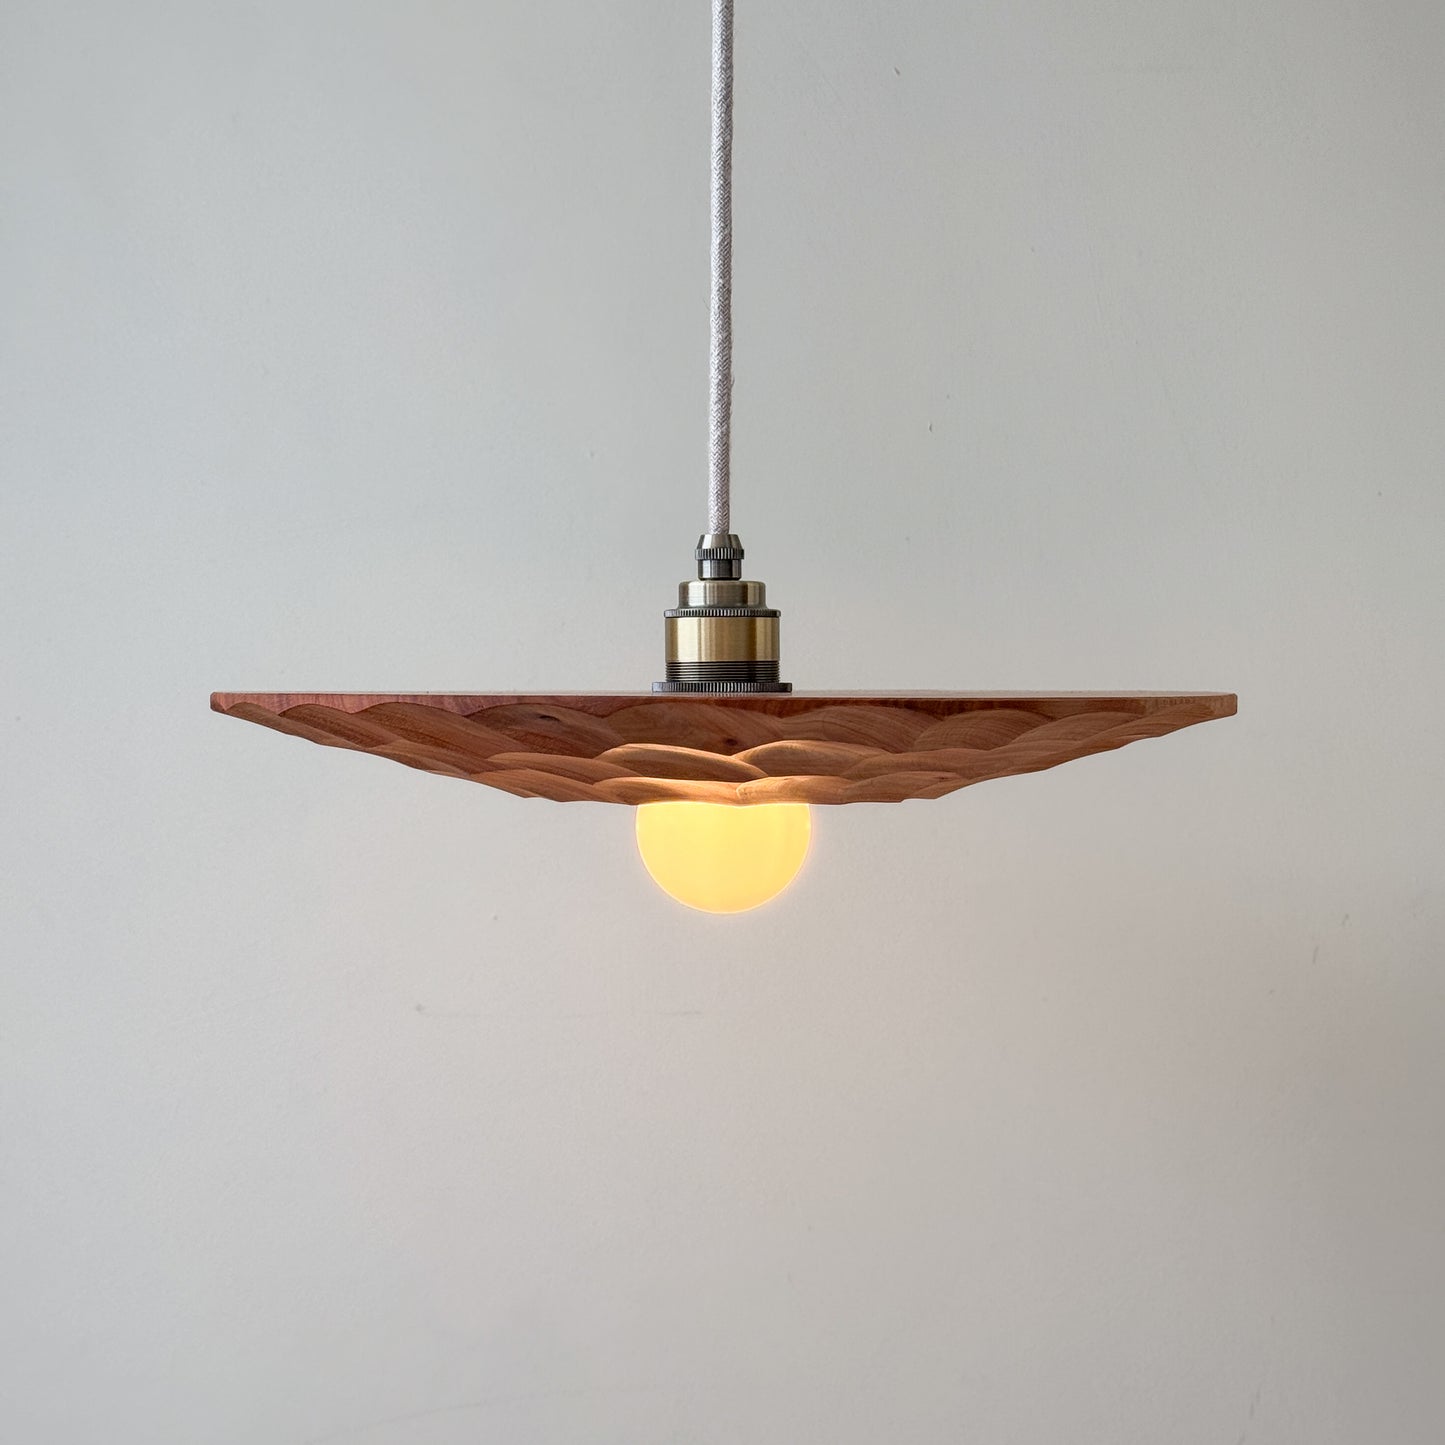 "There is no light without shadow" | Cedar Ceiling Lamp